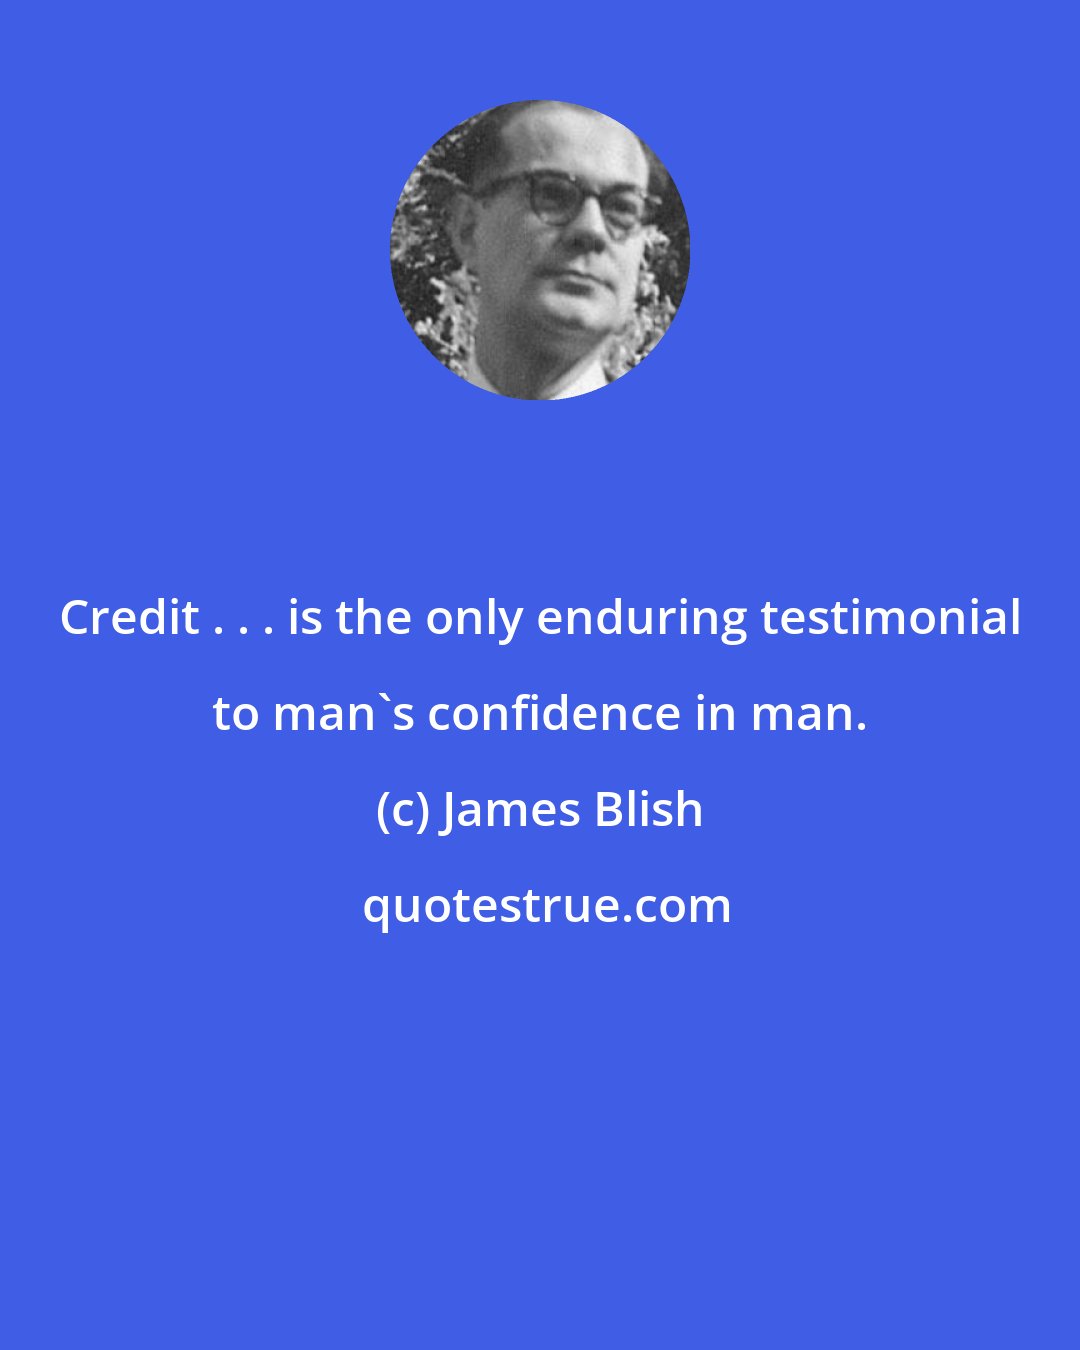 James Blish: Credit . . . is the only enduring testimonial to man's confidence in man.